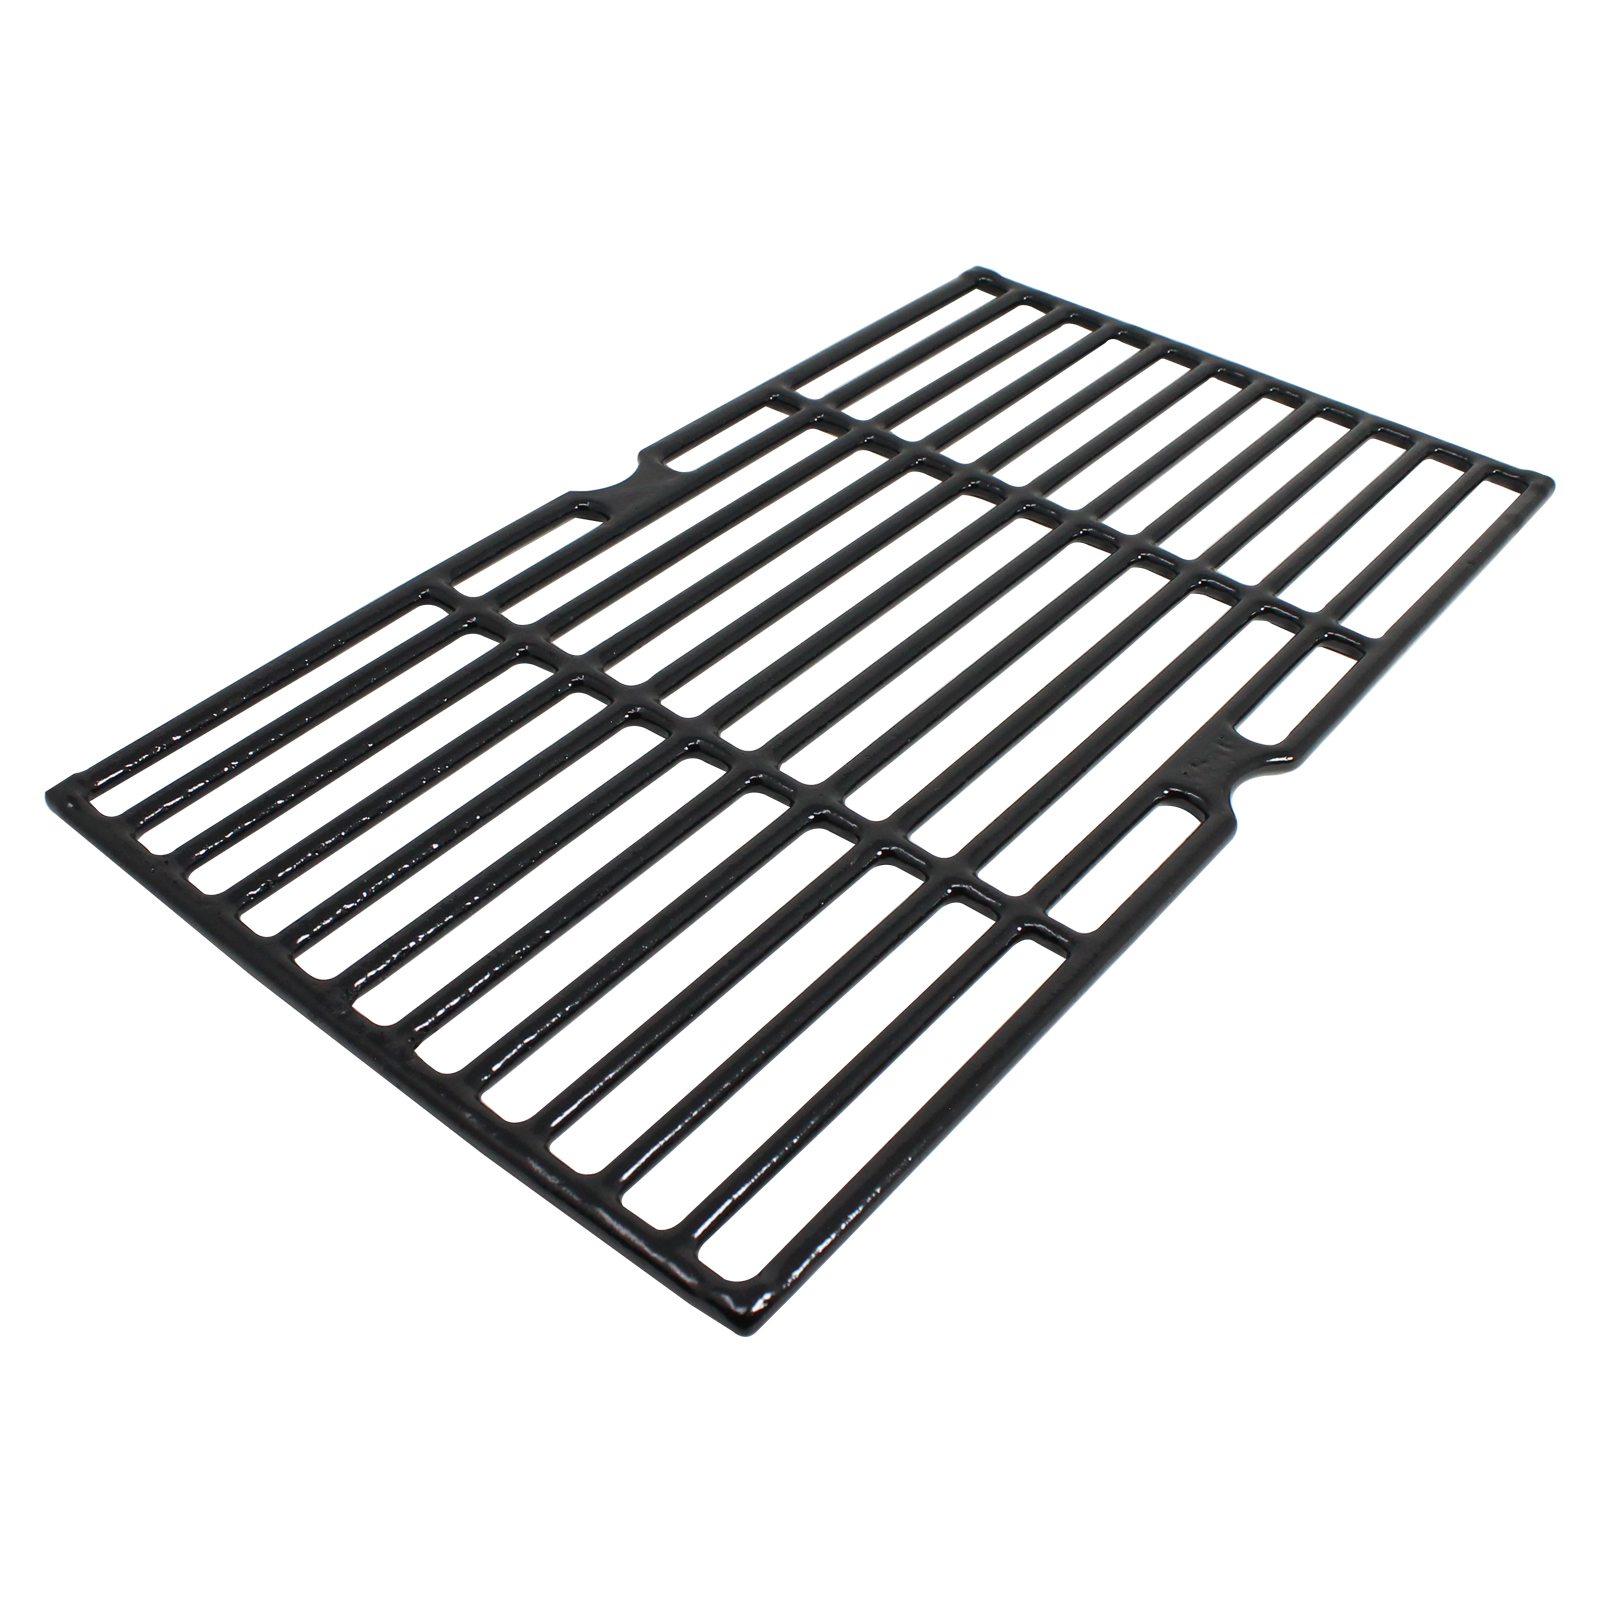 BBQ Grill Cooking Grates Replacement Parts for Kenmore 415.16114010 - Compatible Barbeque Cast Iron Grid 16 3/4" - image 2 of 4